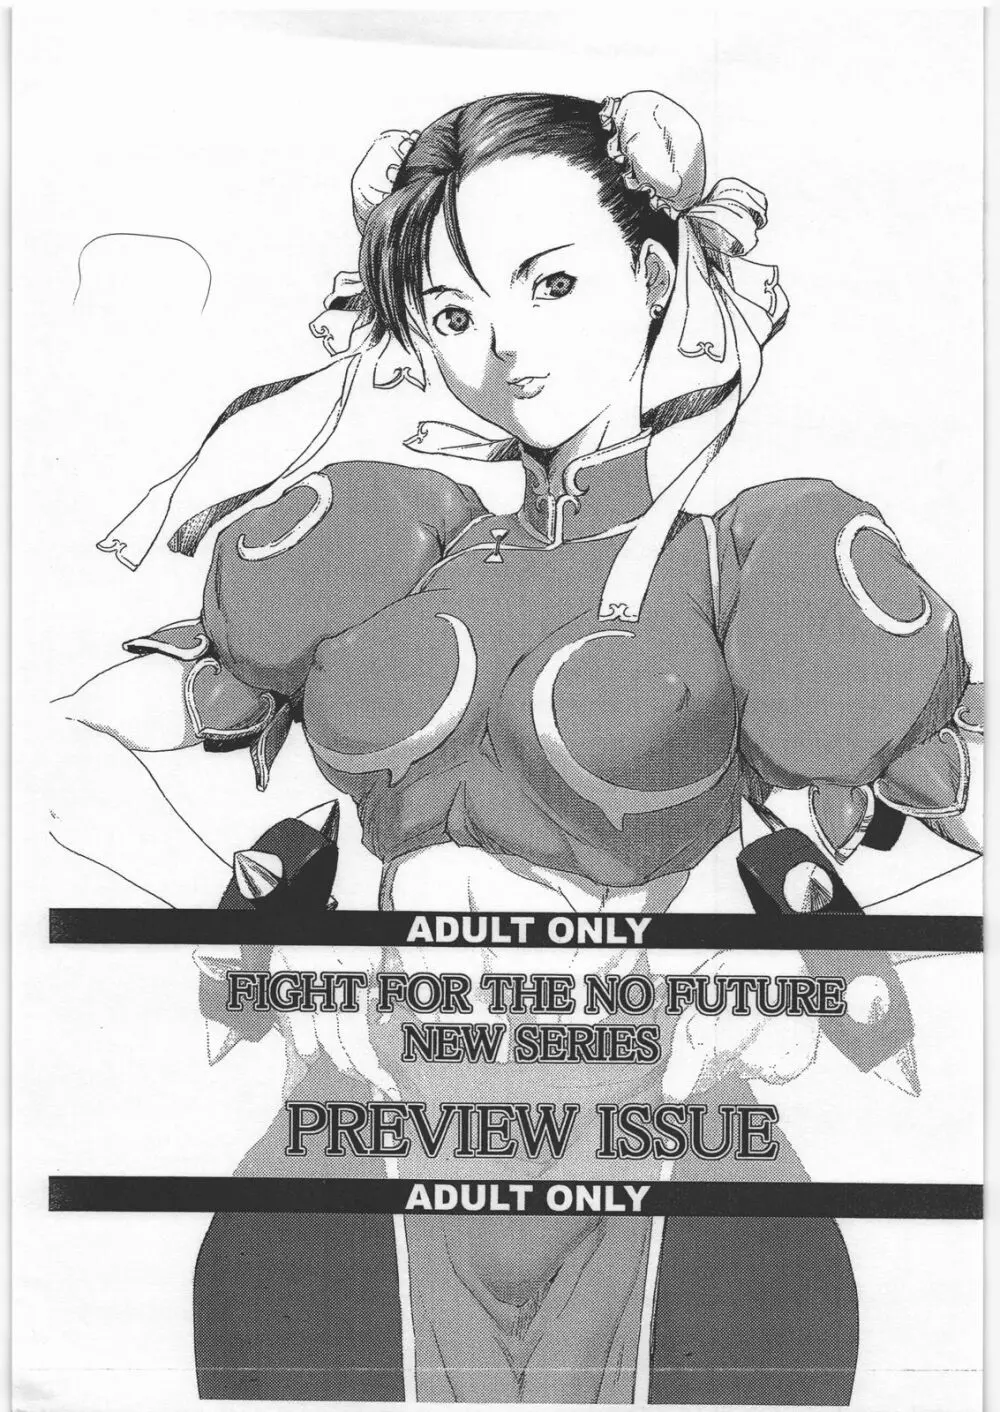 FIGHT FOR THE NO FUTURE NEW SERIES PREVIEW - page1